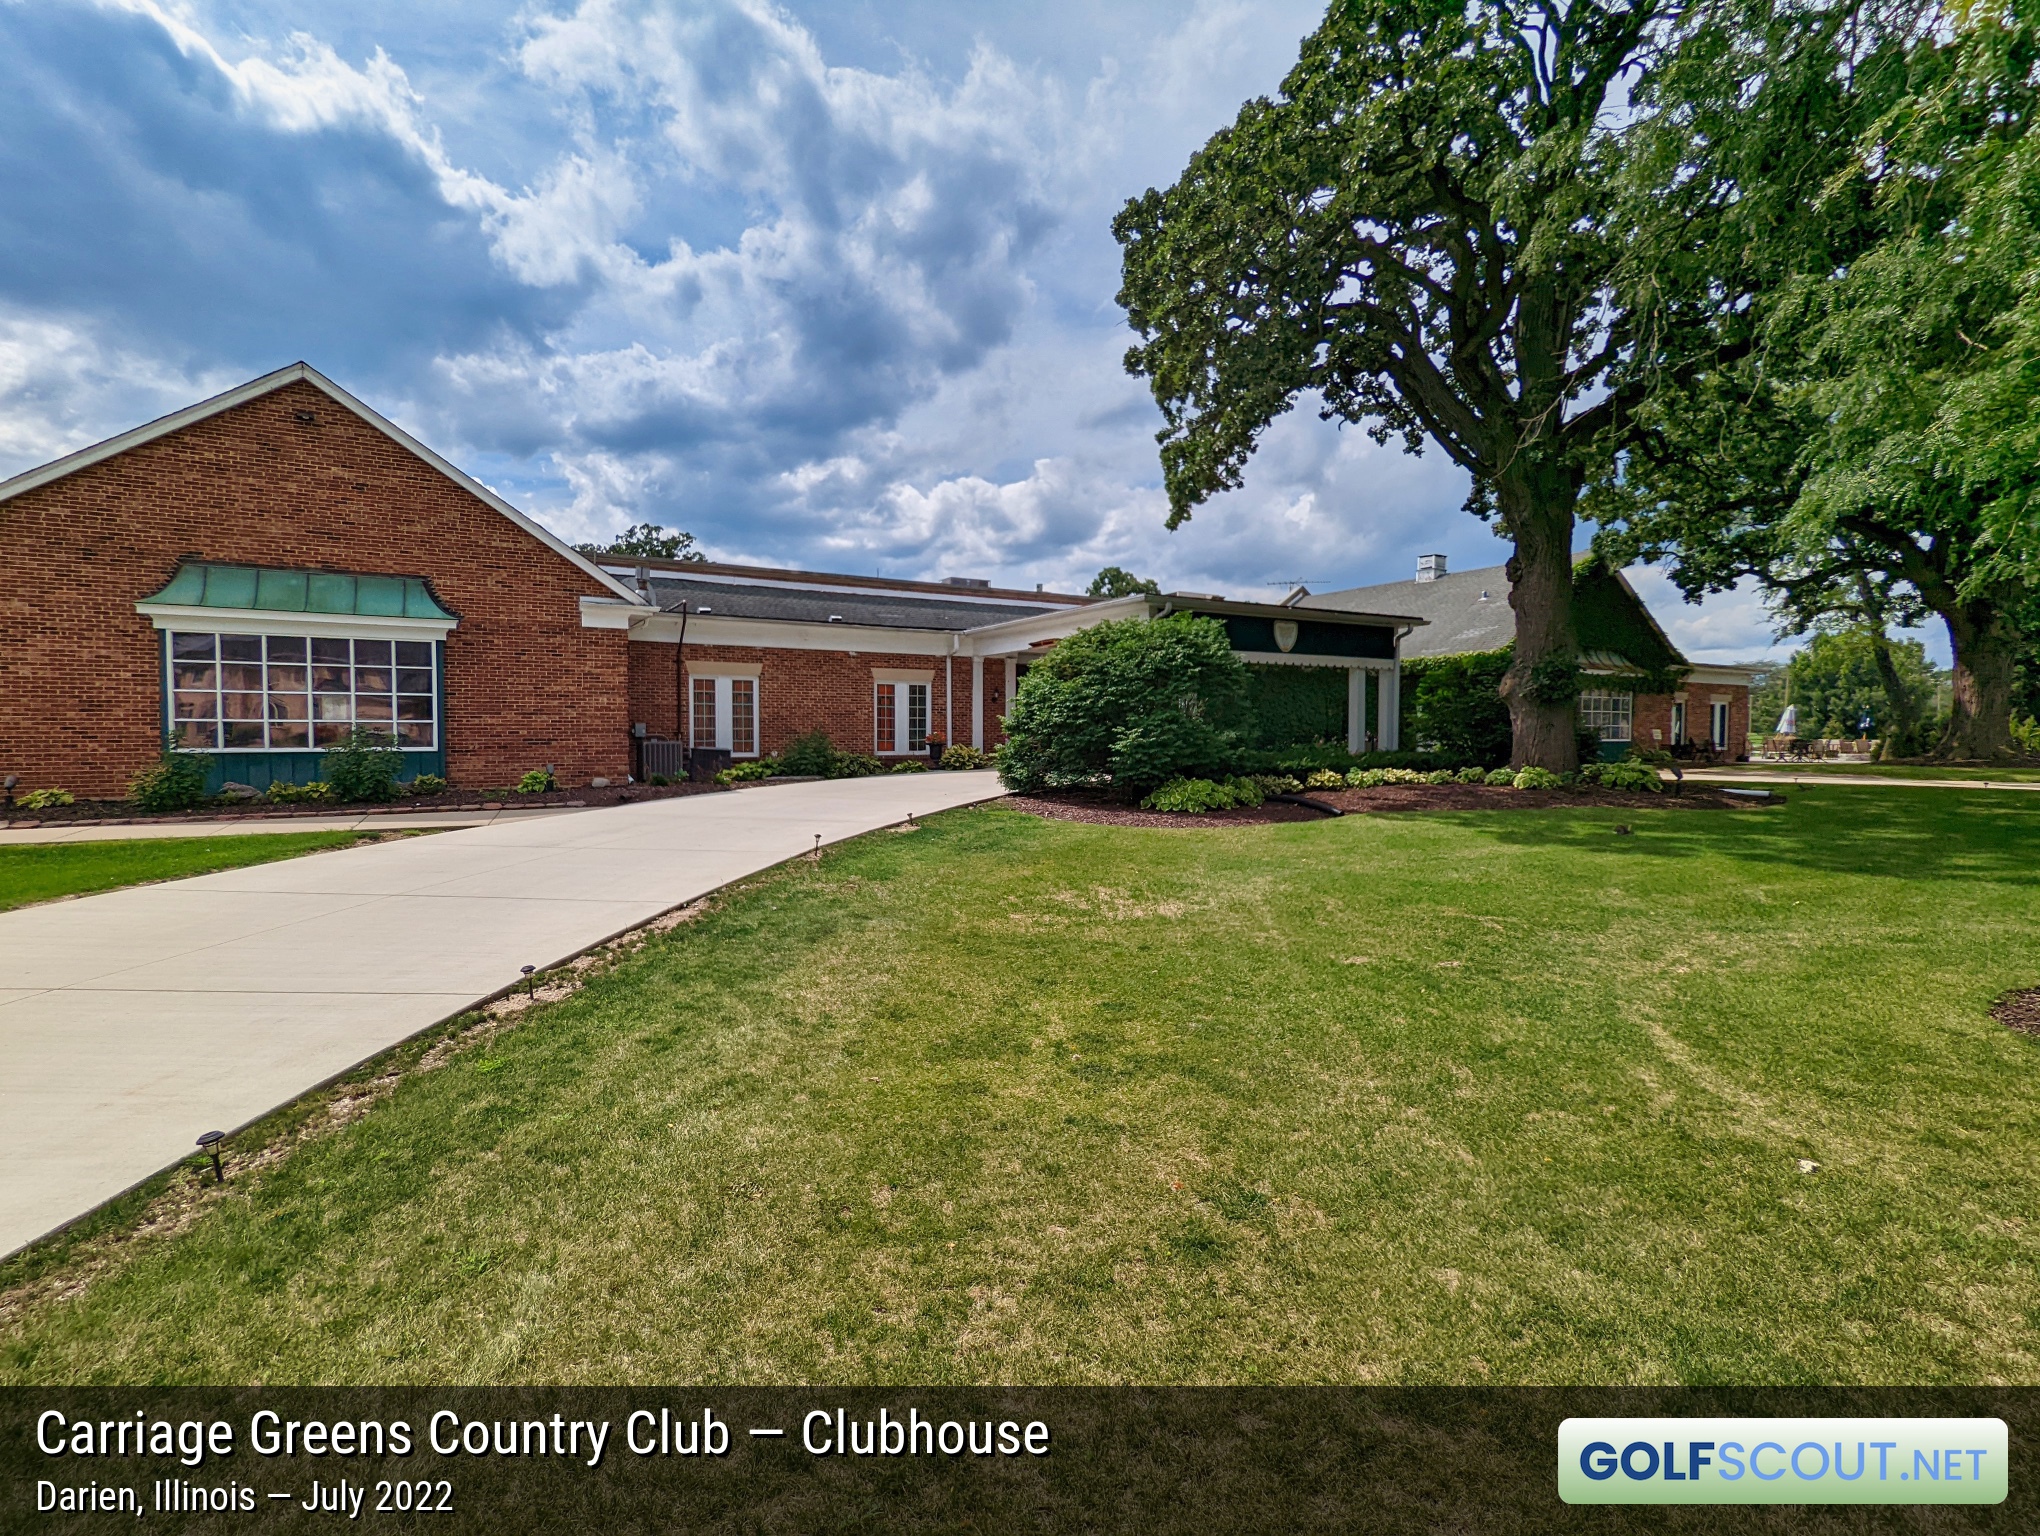 Photo of the clubhouse at Carriage Greens Country Club in Darien, Illinois. 